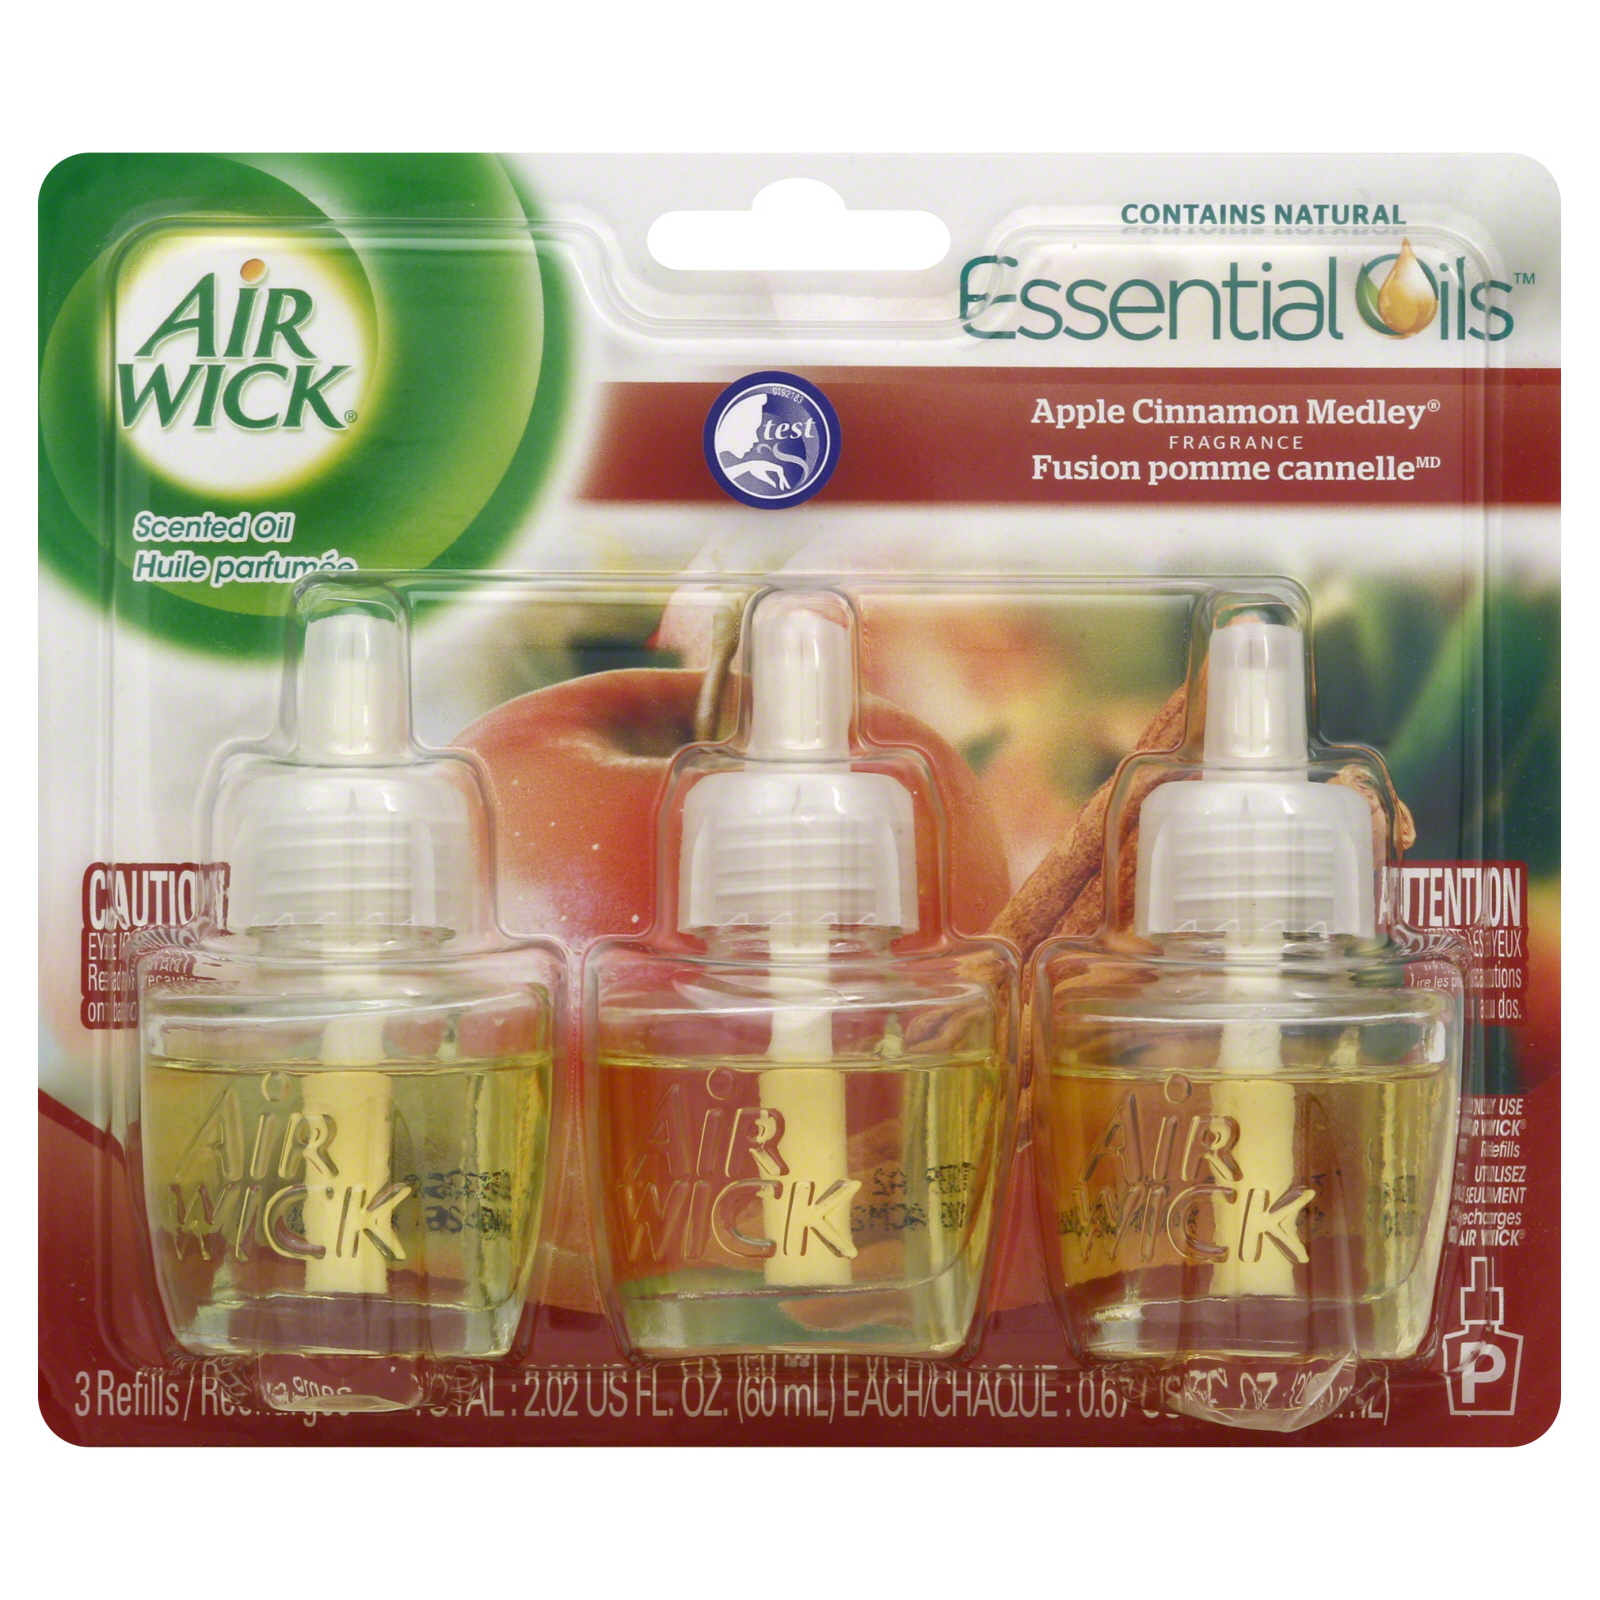 Airwick Scented Oil Triple Refill Relaxation Apple Cinnamon Medley 0.67 oz